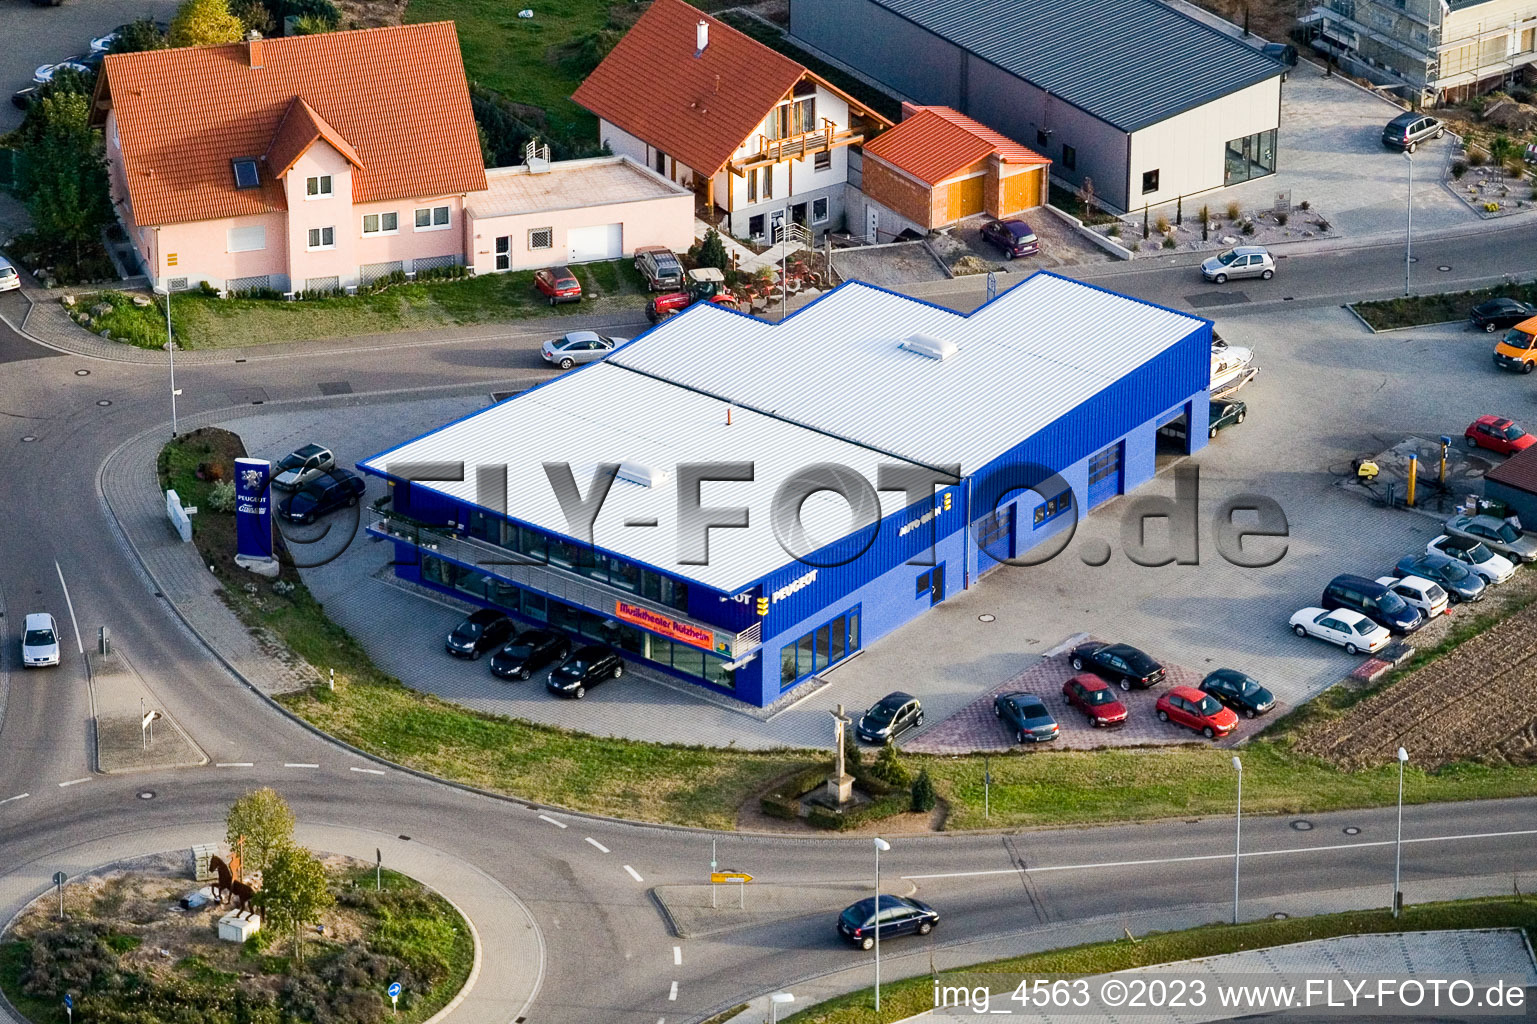 Nordring, Peugeot Autohaus Grün in Rülzheim in the state Rhineland-Palatinate, Germany from above